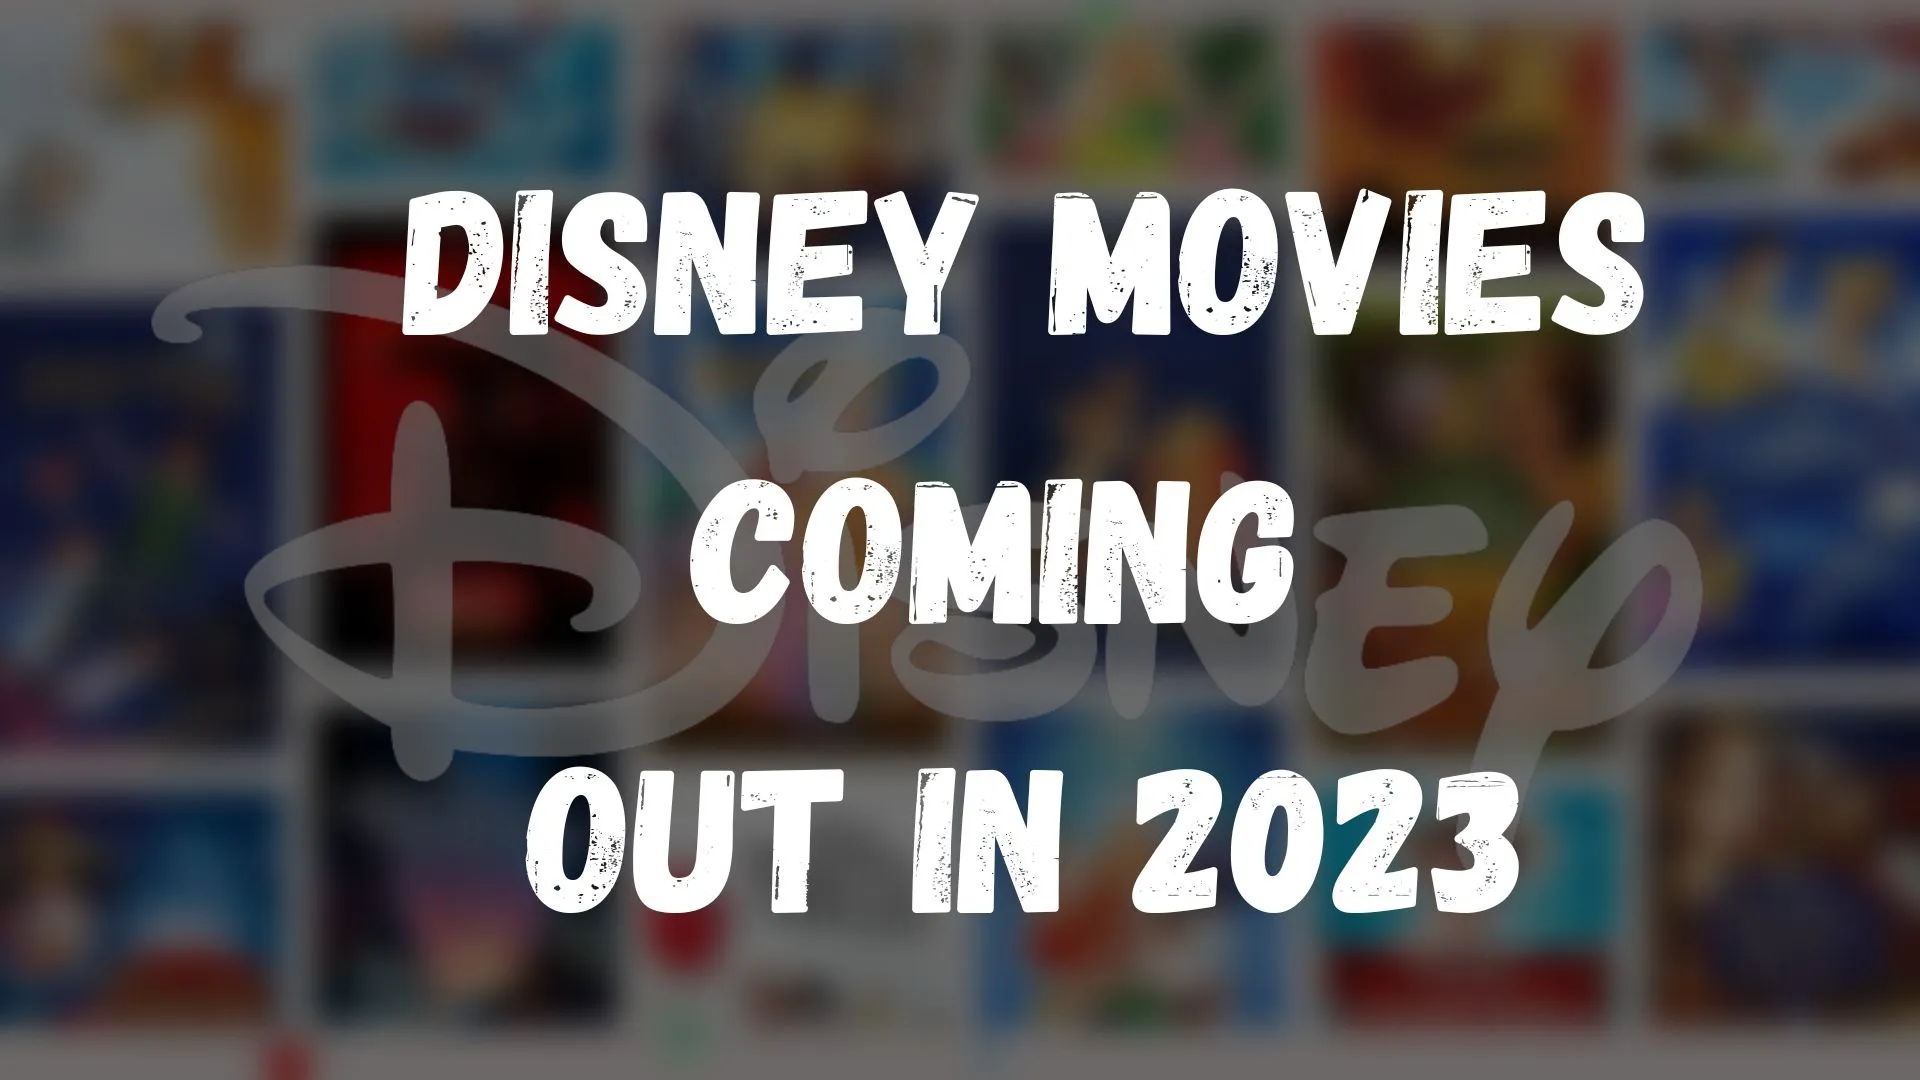 Disney Movies Coming out in 2023